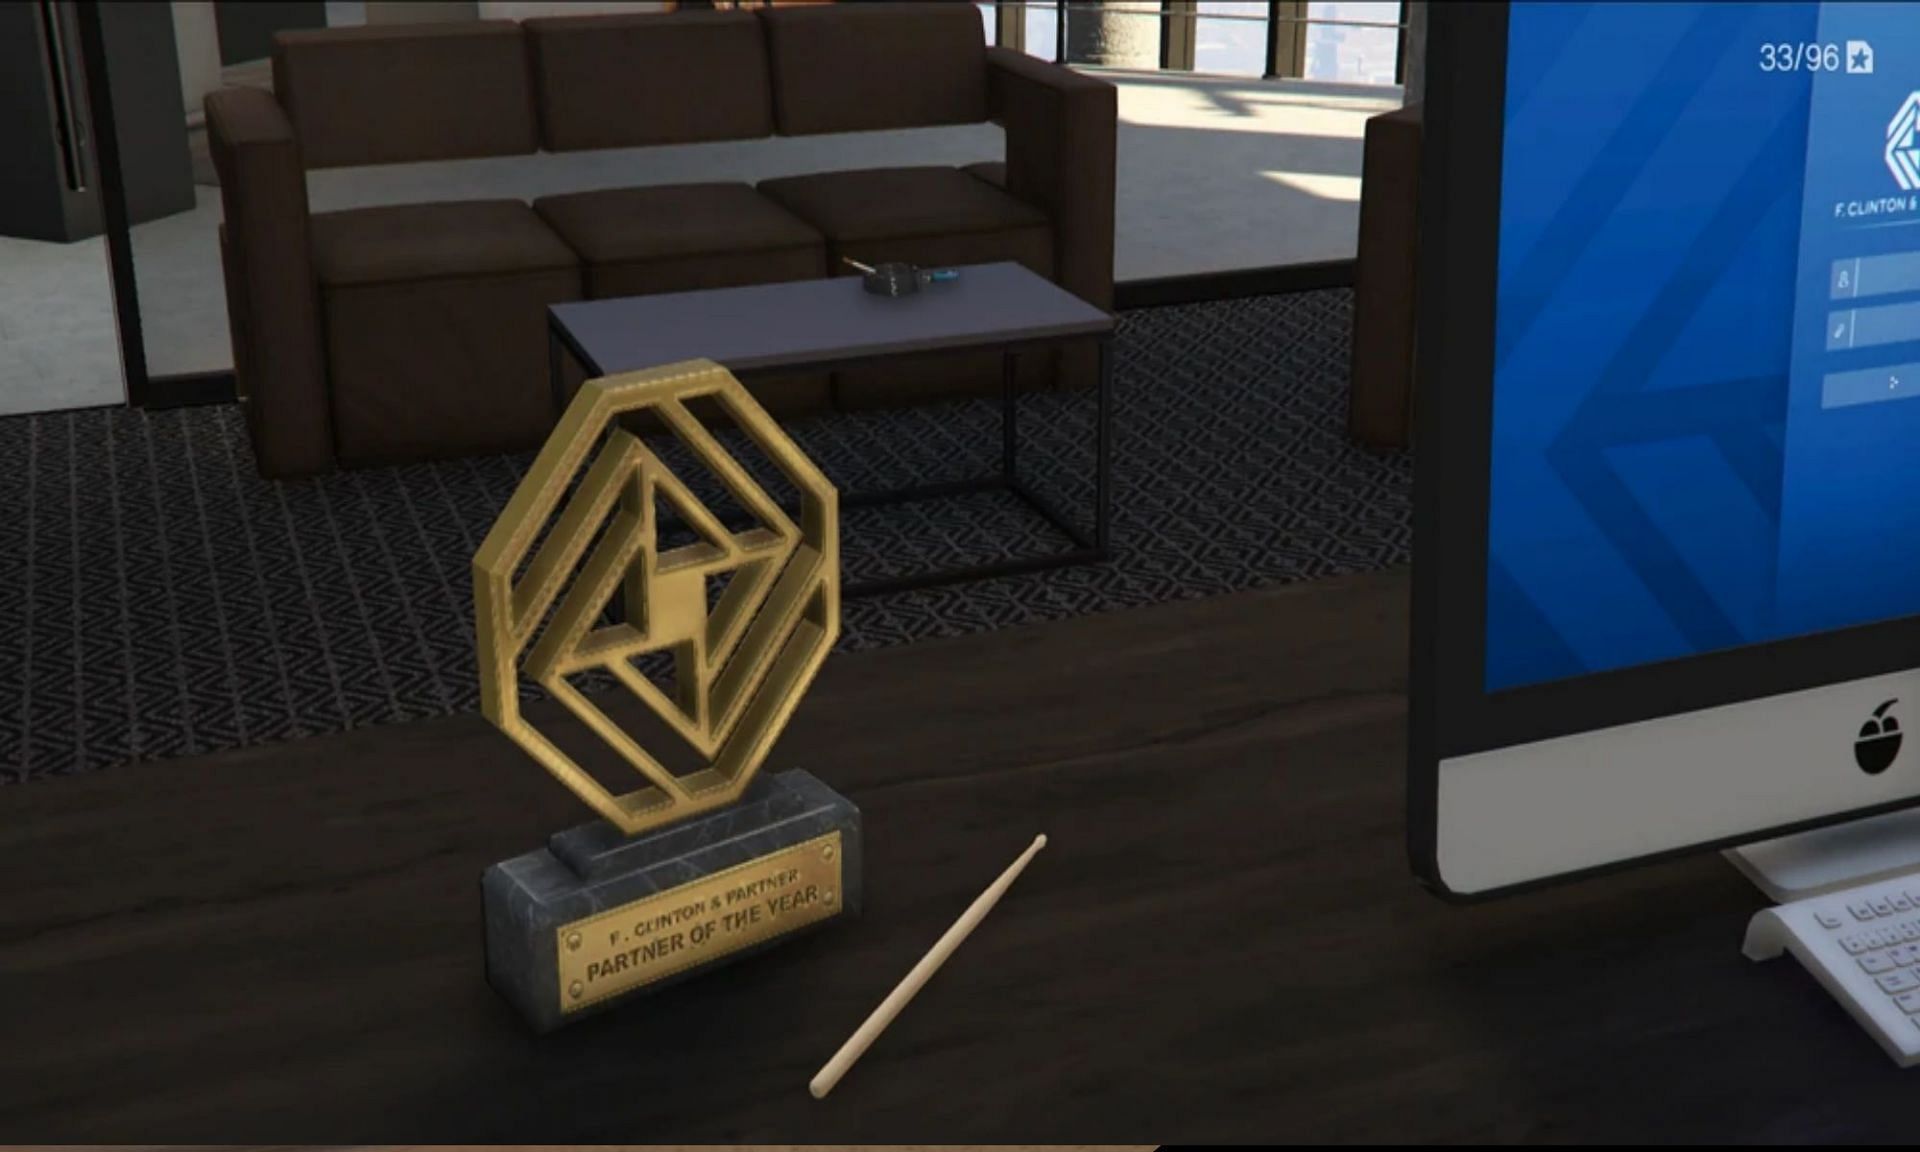 Here is the Partner of the Year trophy (Image via Rockstar Games)